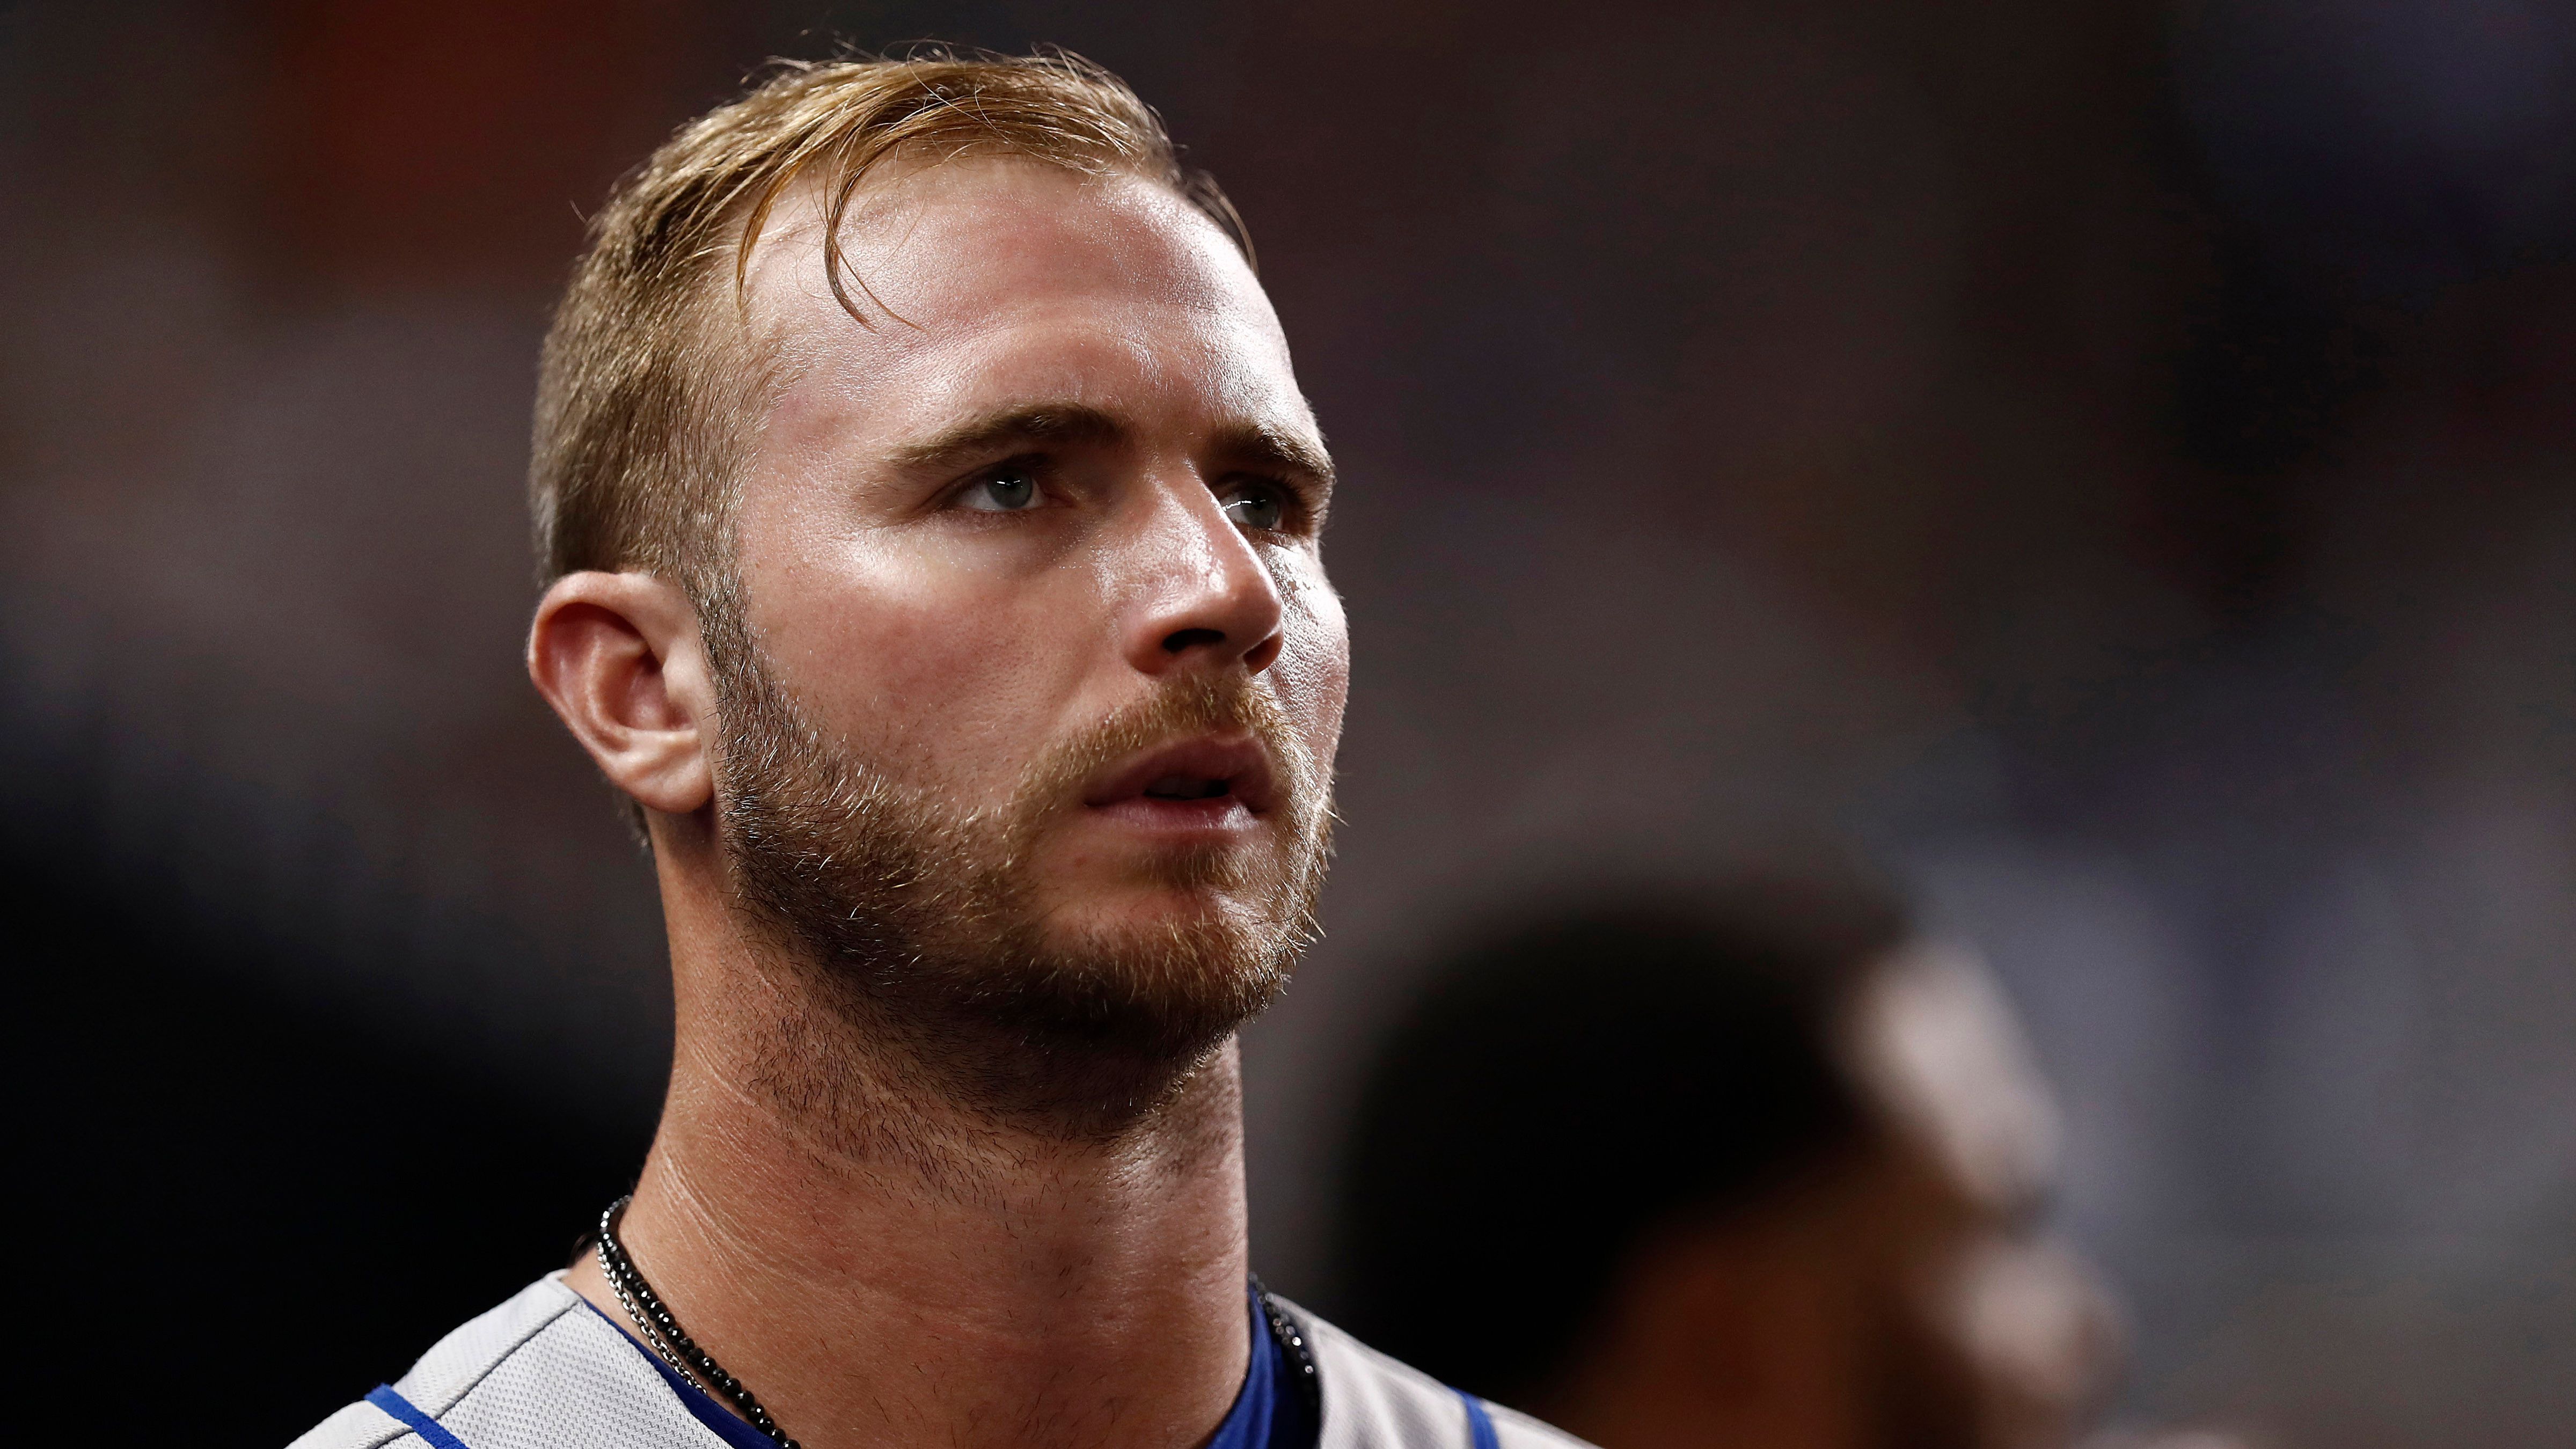 Tampa native, Mets star Pete Alonso: 'I have a voice and I will not remain  silent